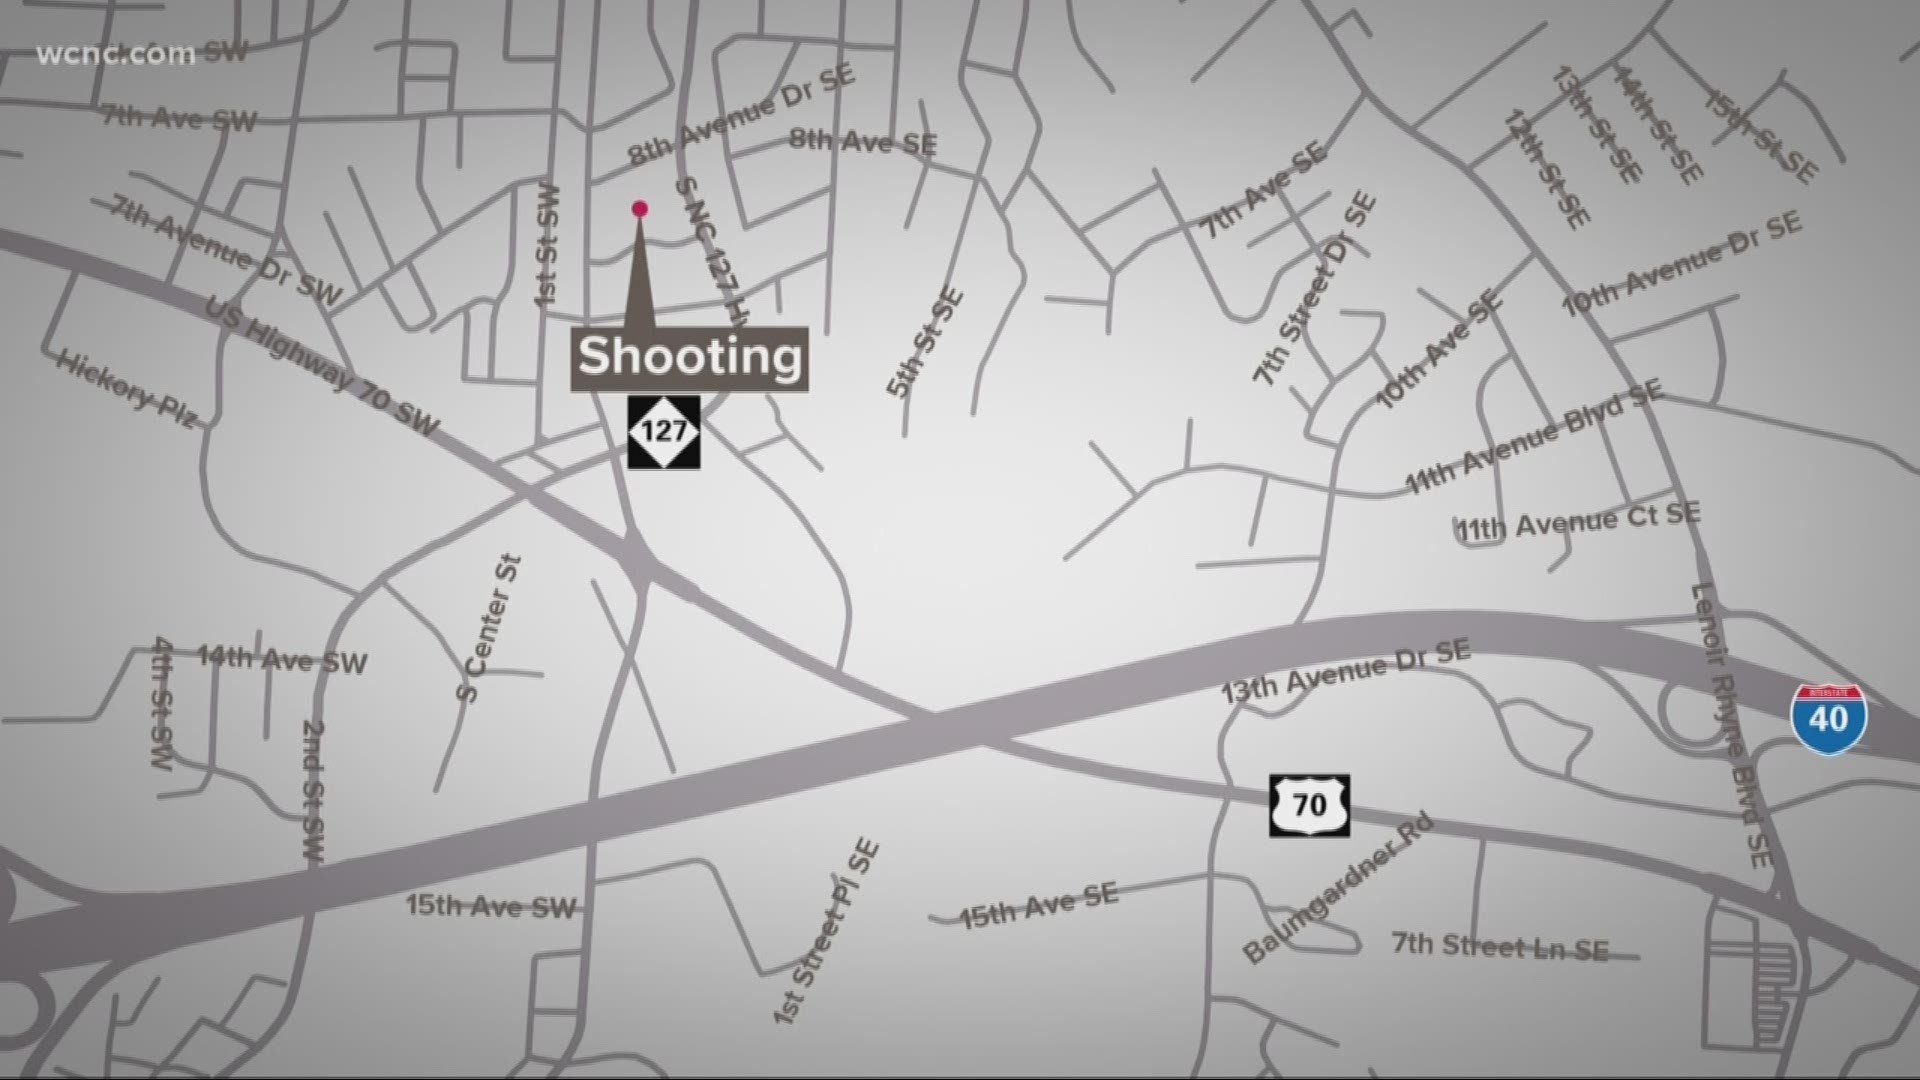 Police in Hickory said a 3-year-old girl and 16-year-old boy were injured in a shooting at an apartment complex Thursday night.